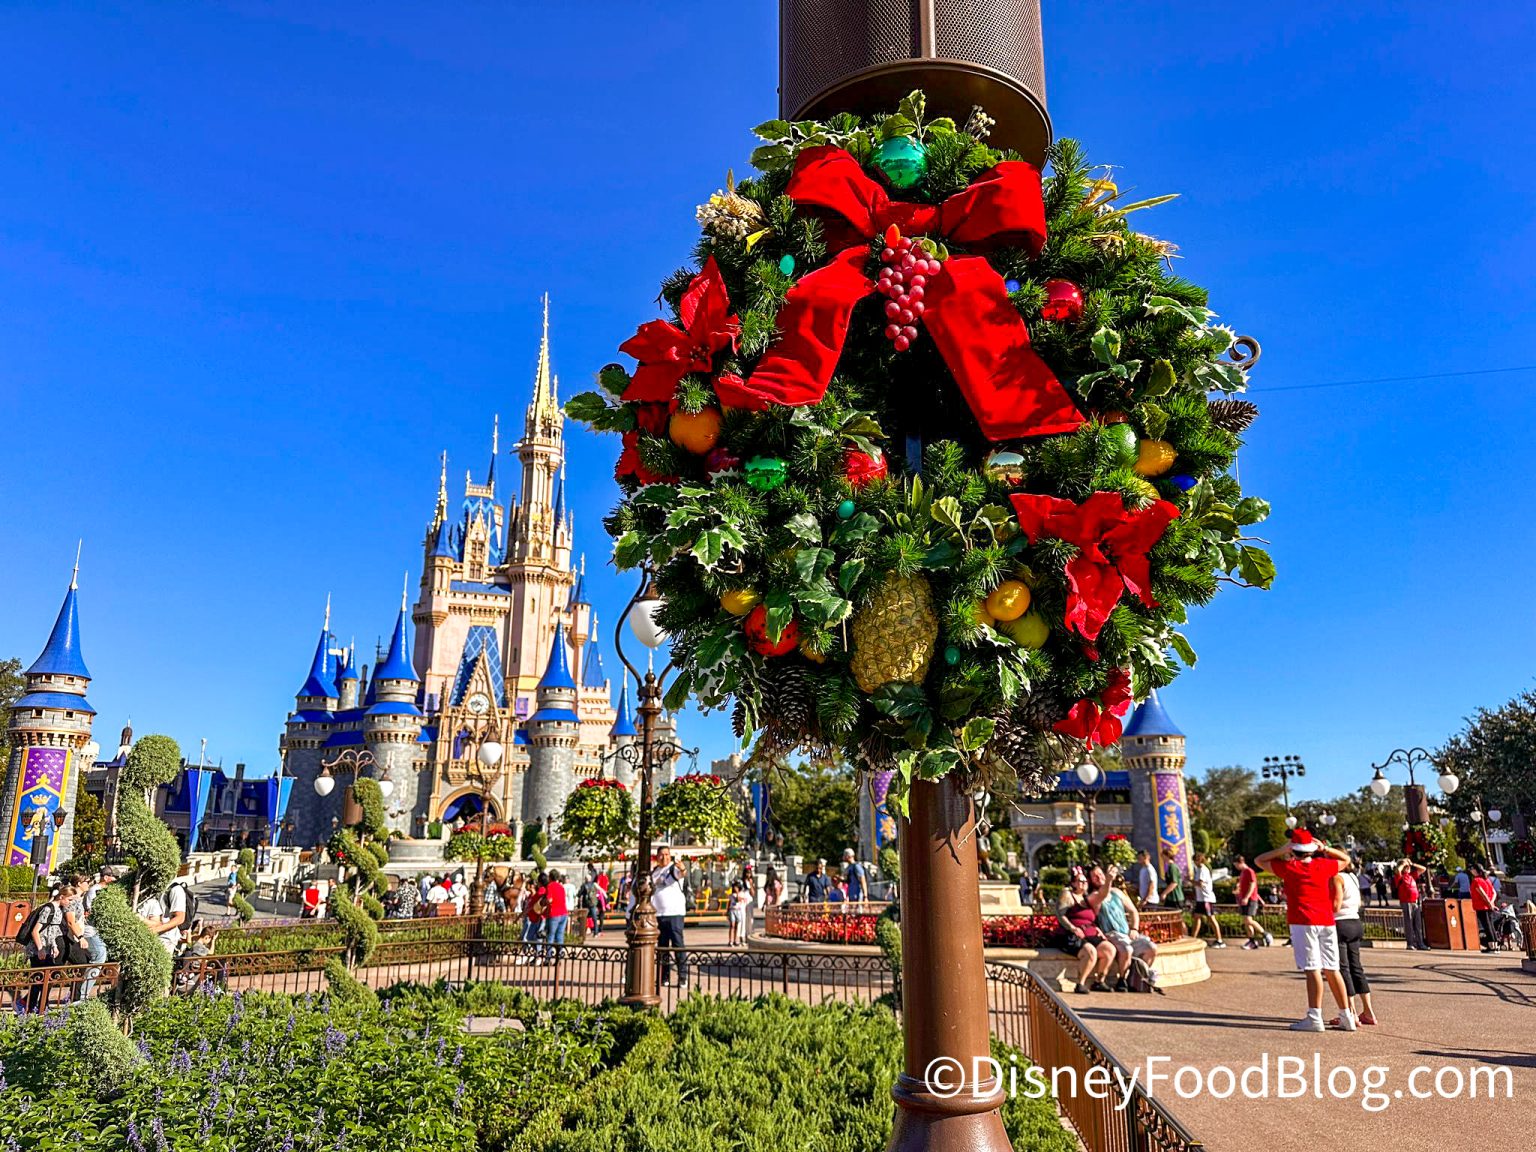 The Magic Kingdom Christmas Overlay We JUST FOUND OUT ABOUT! the